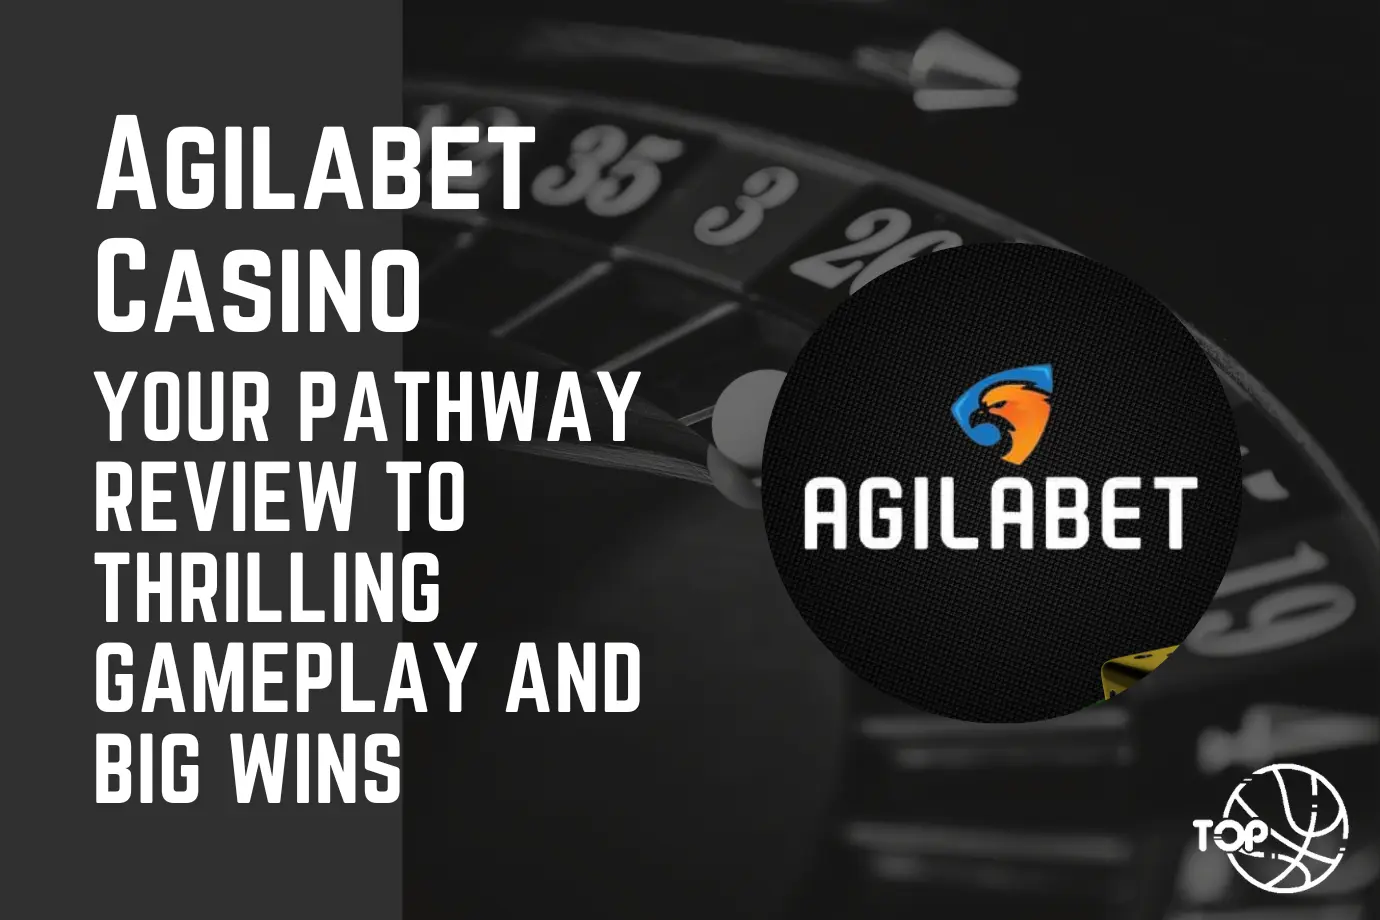 Agilabet Casino: Your Pathway Review to Thrilling Gameplay and Big Wins